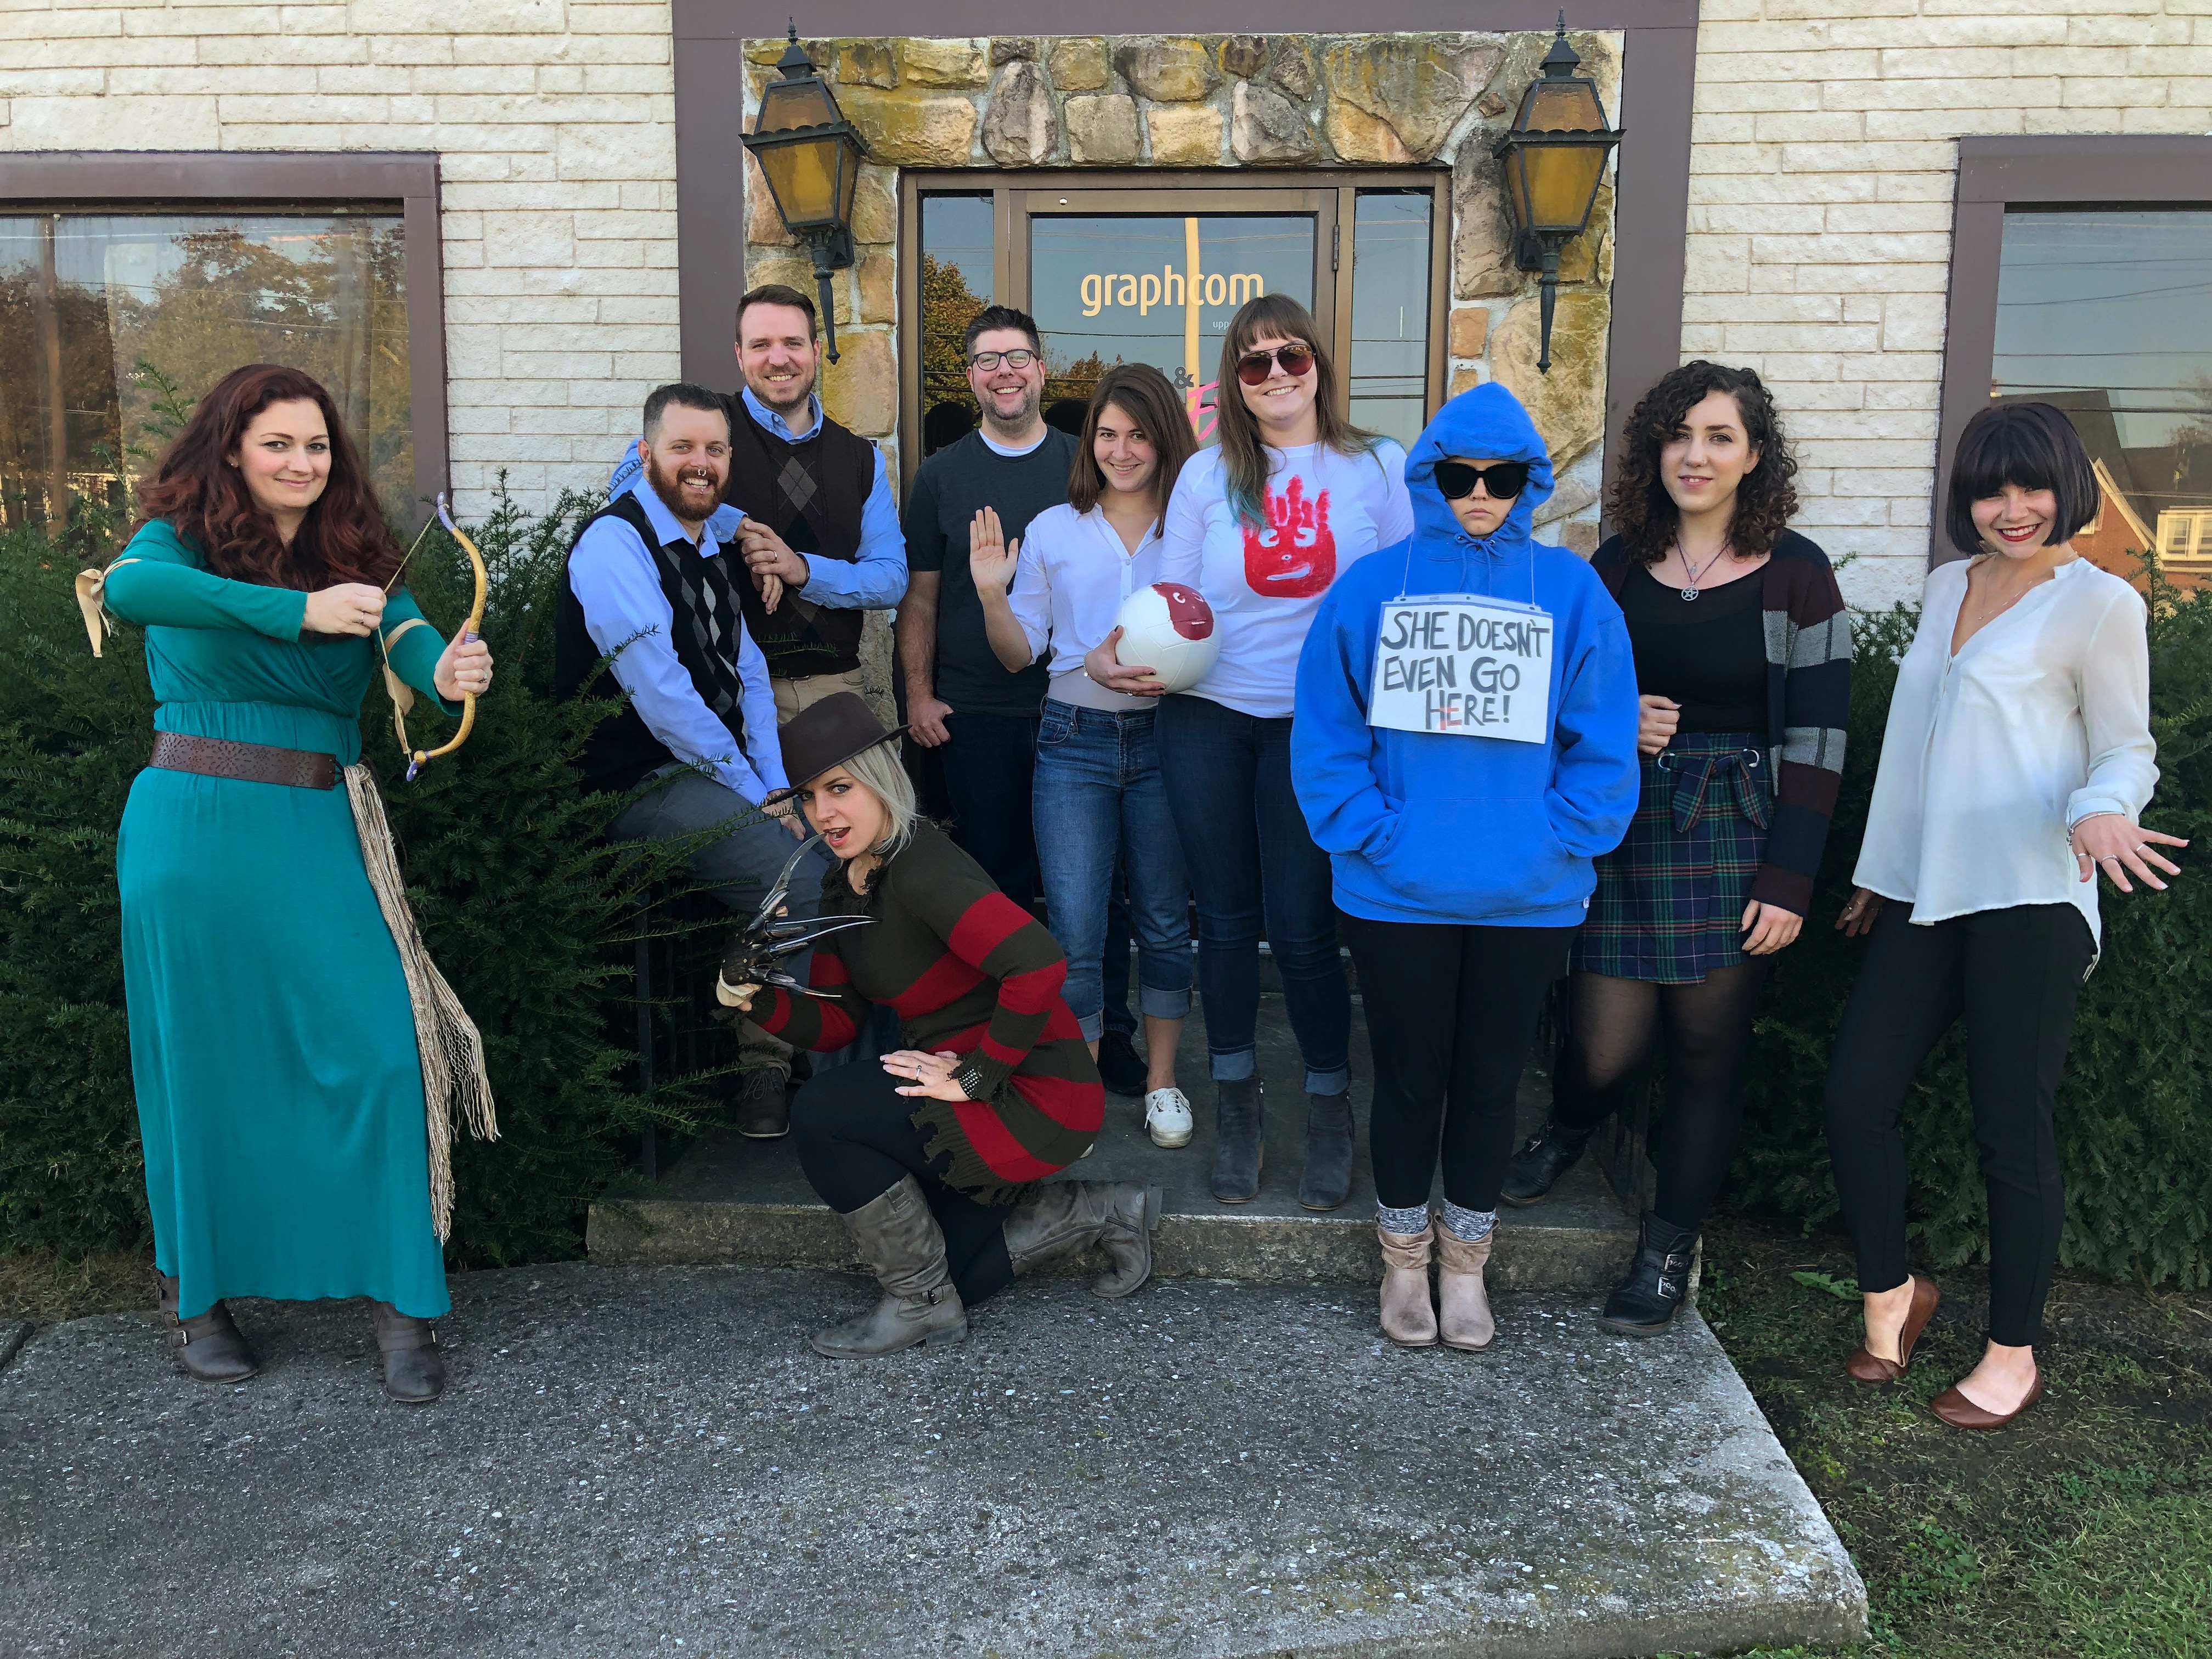 graphcom employees dressed up as movie characters for spirit week